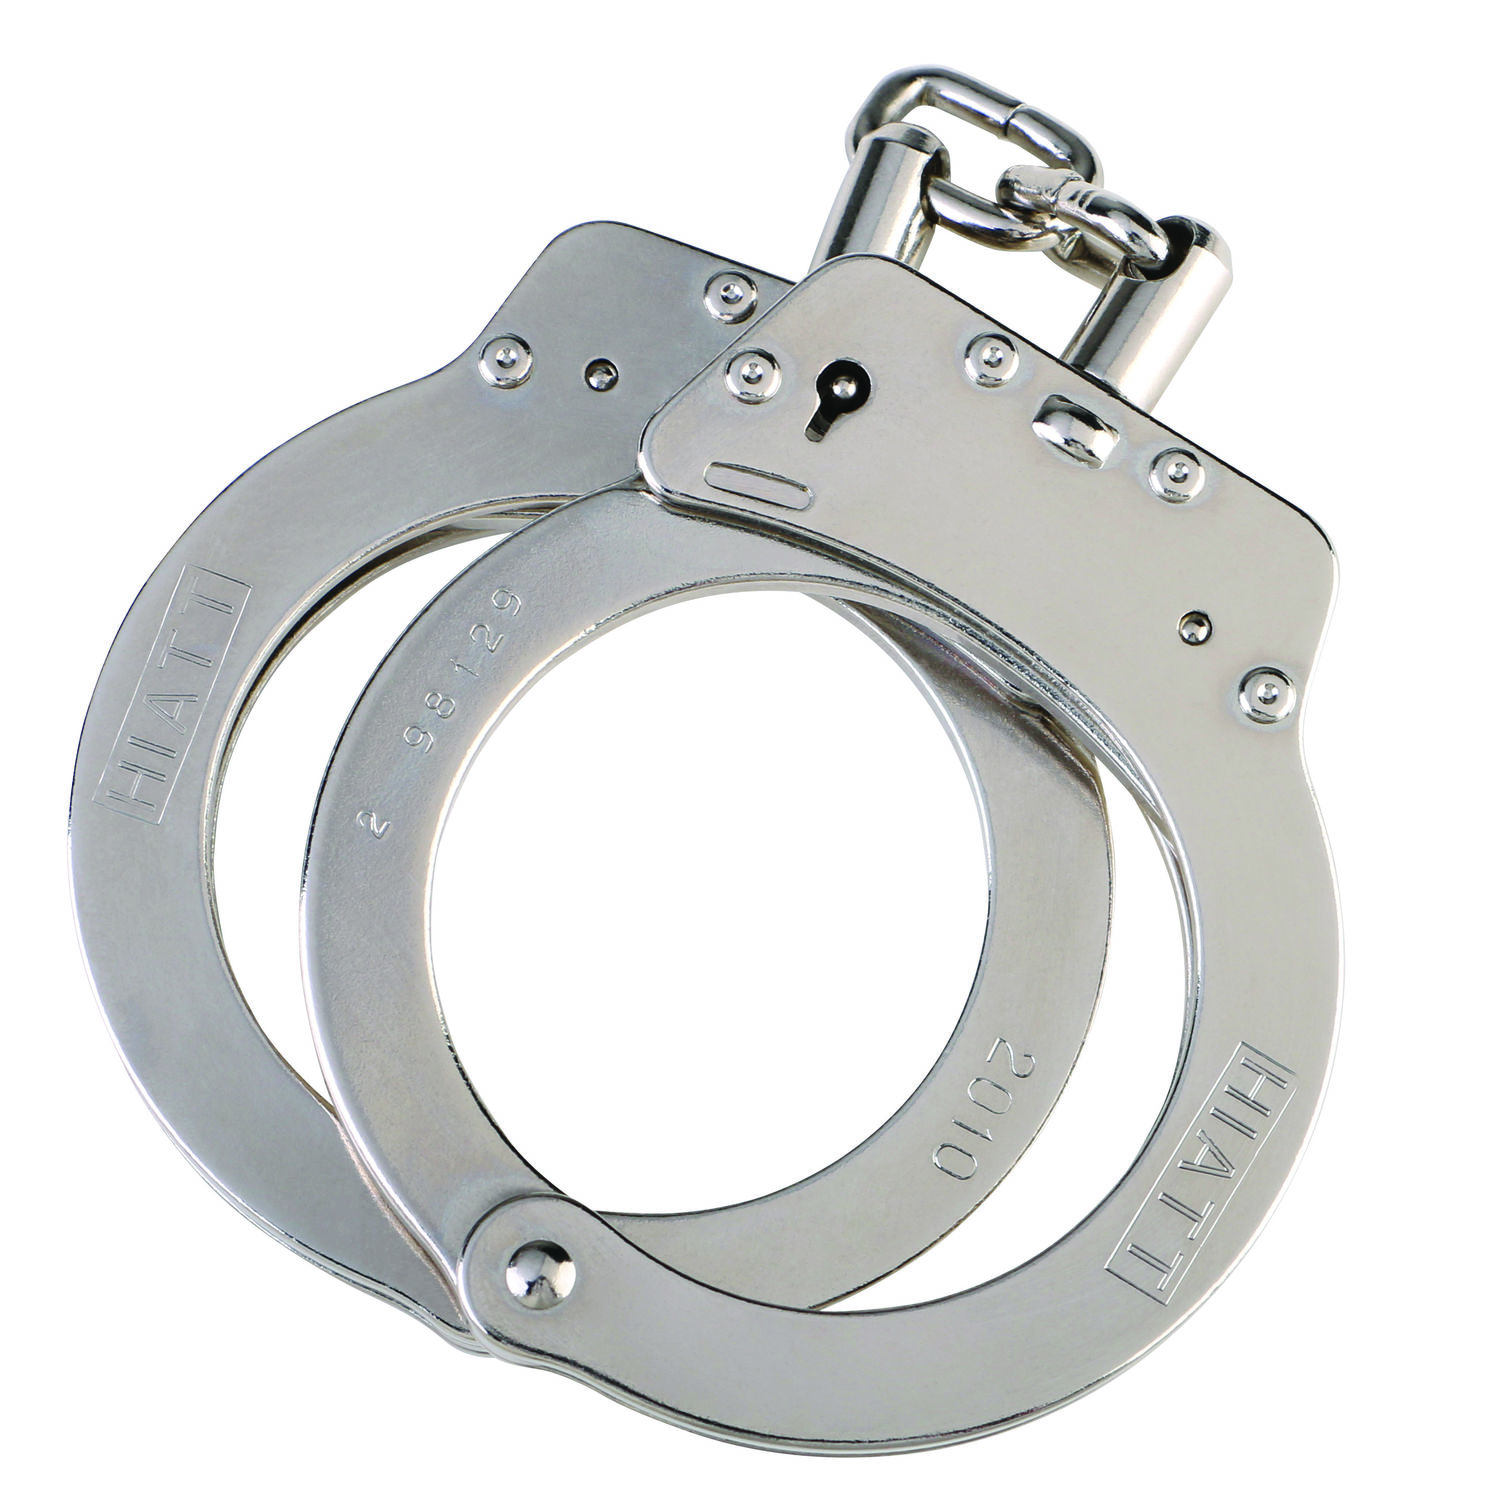 Standard Steel Chain Handcuffs with Nickel Finish - The Safariland Group